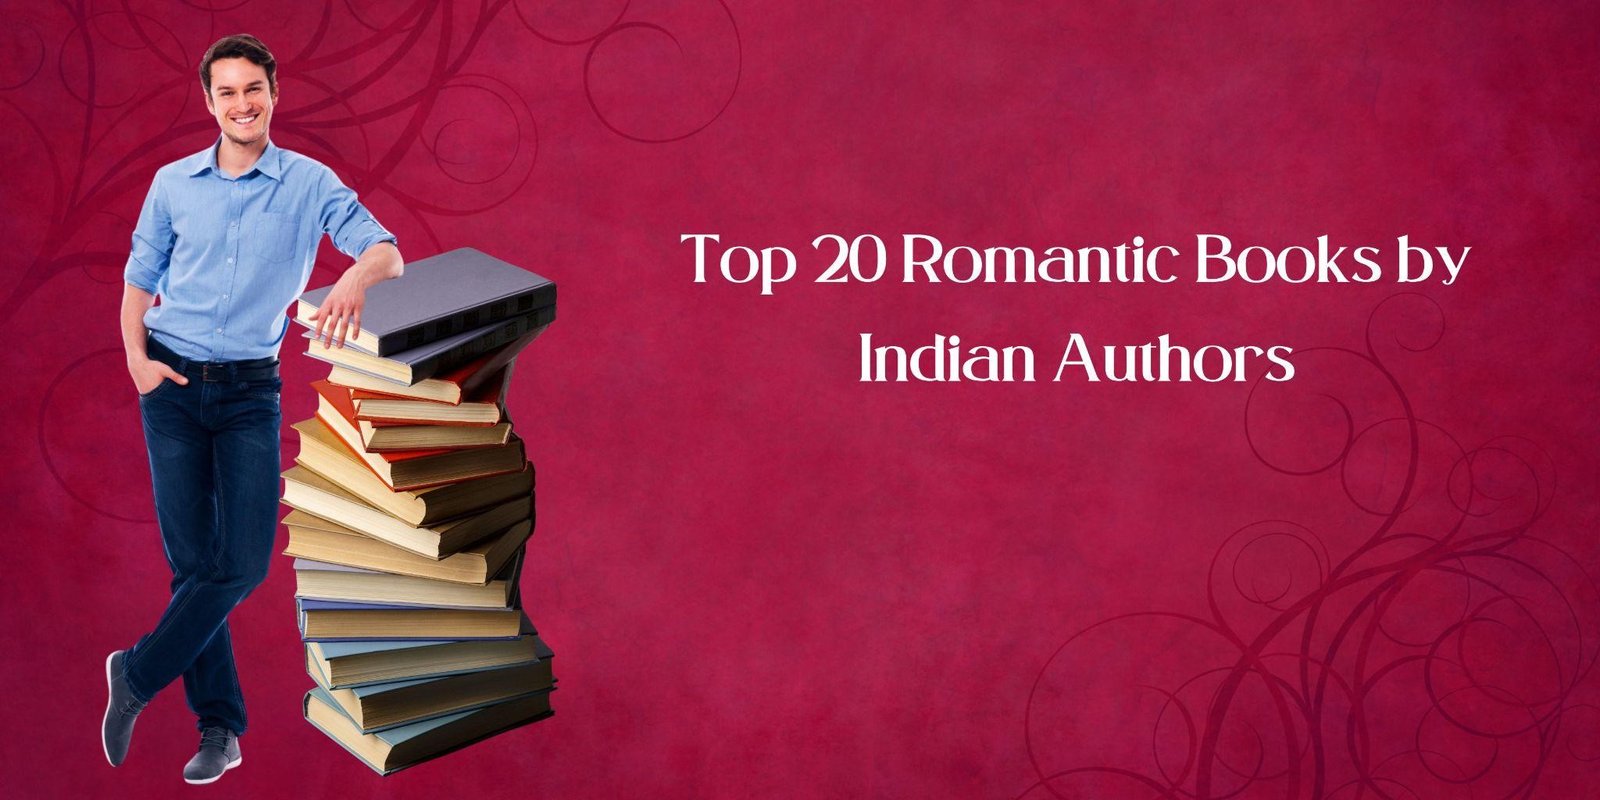 Top 20 Romantic Books by Indian Authors